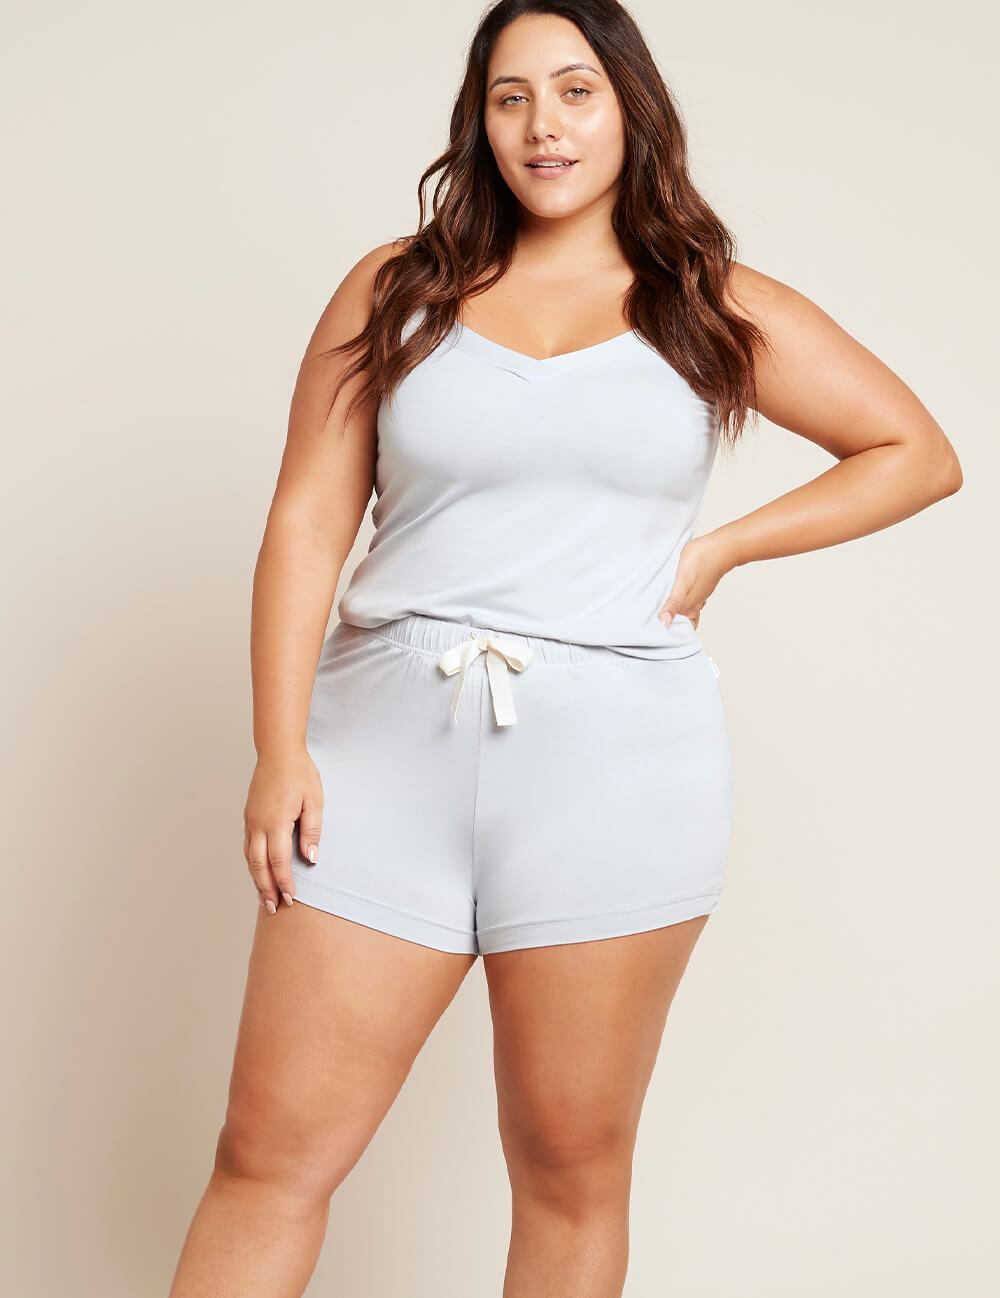 A best seller the sleep cami and sleep short.   Shown in Dove